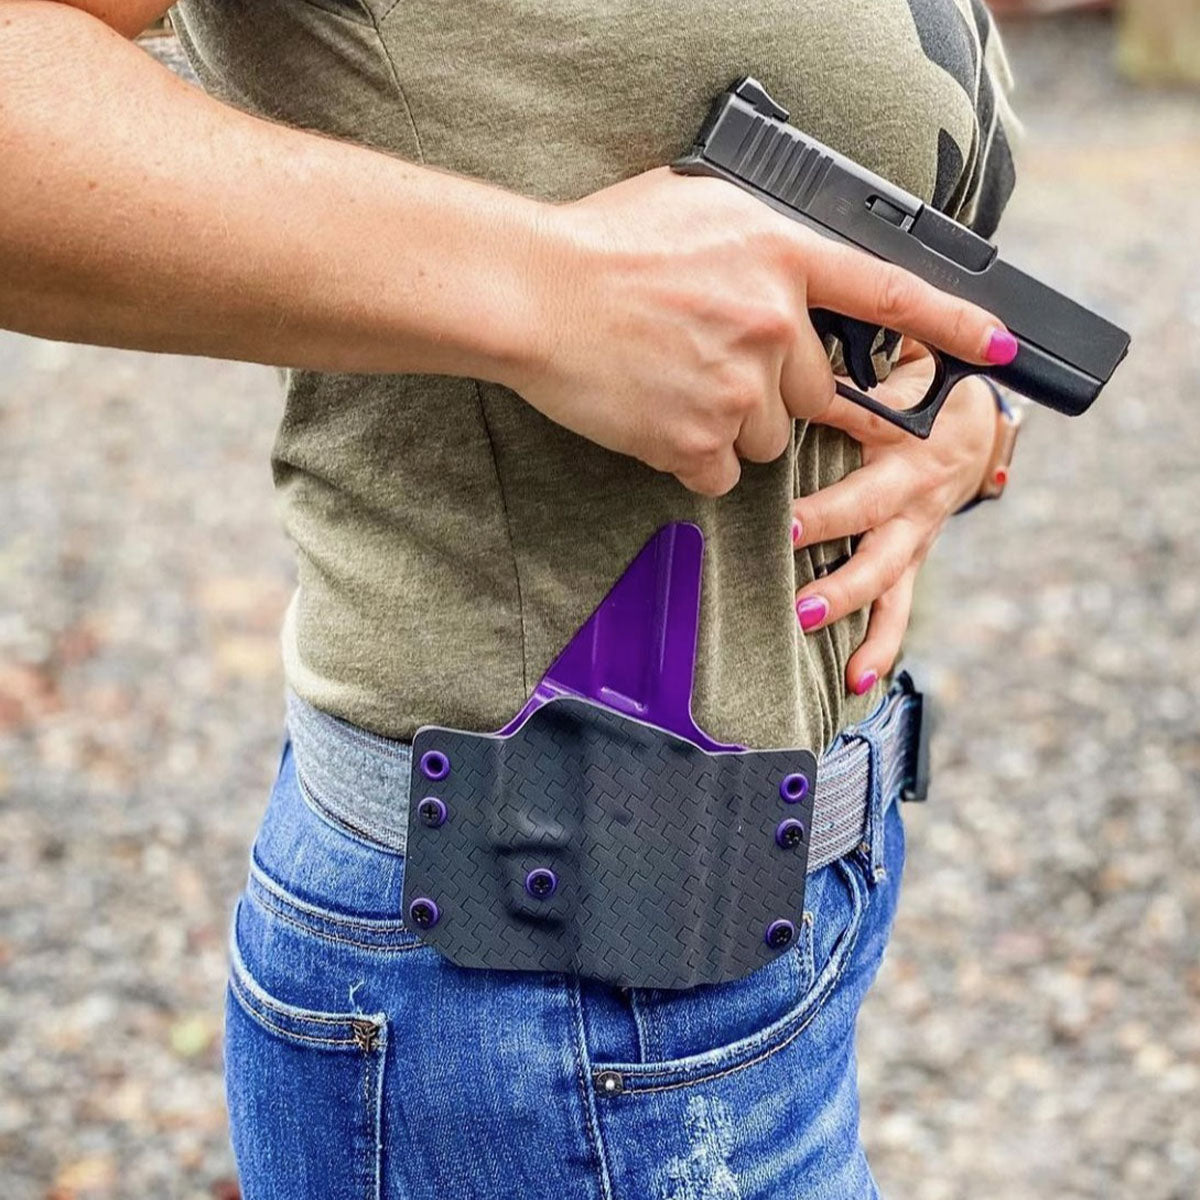 EDC Tray Mold  Quality custom Kydex® holsters at an affordable price.